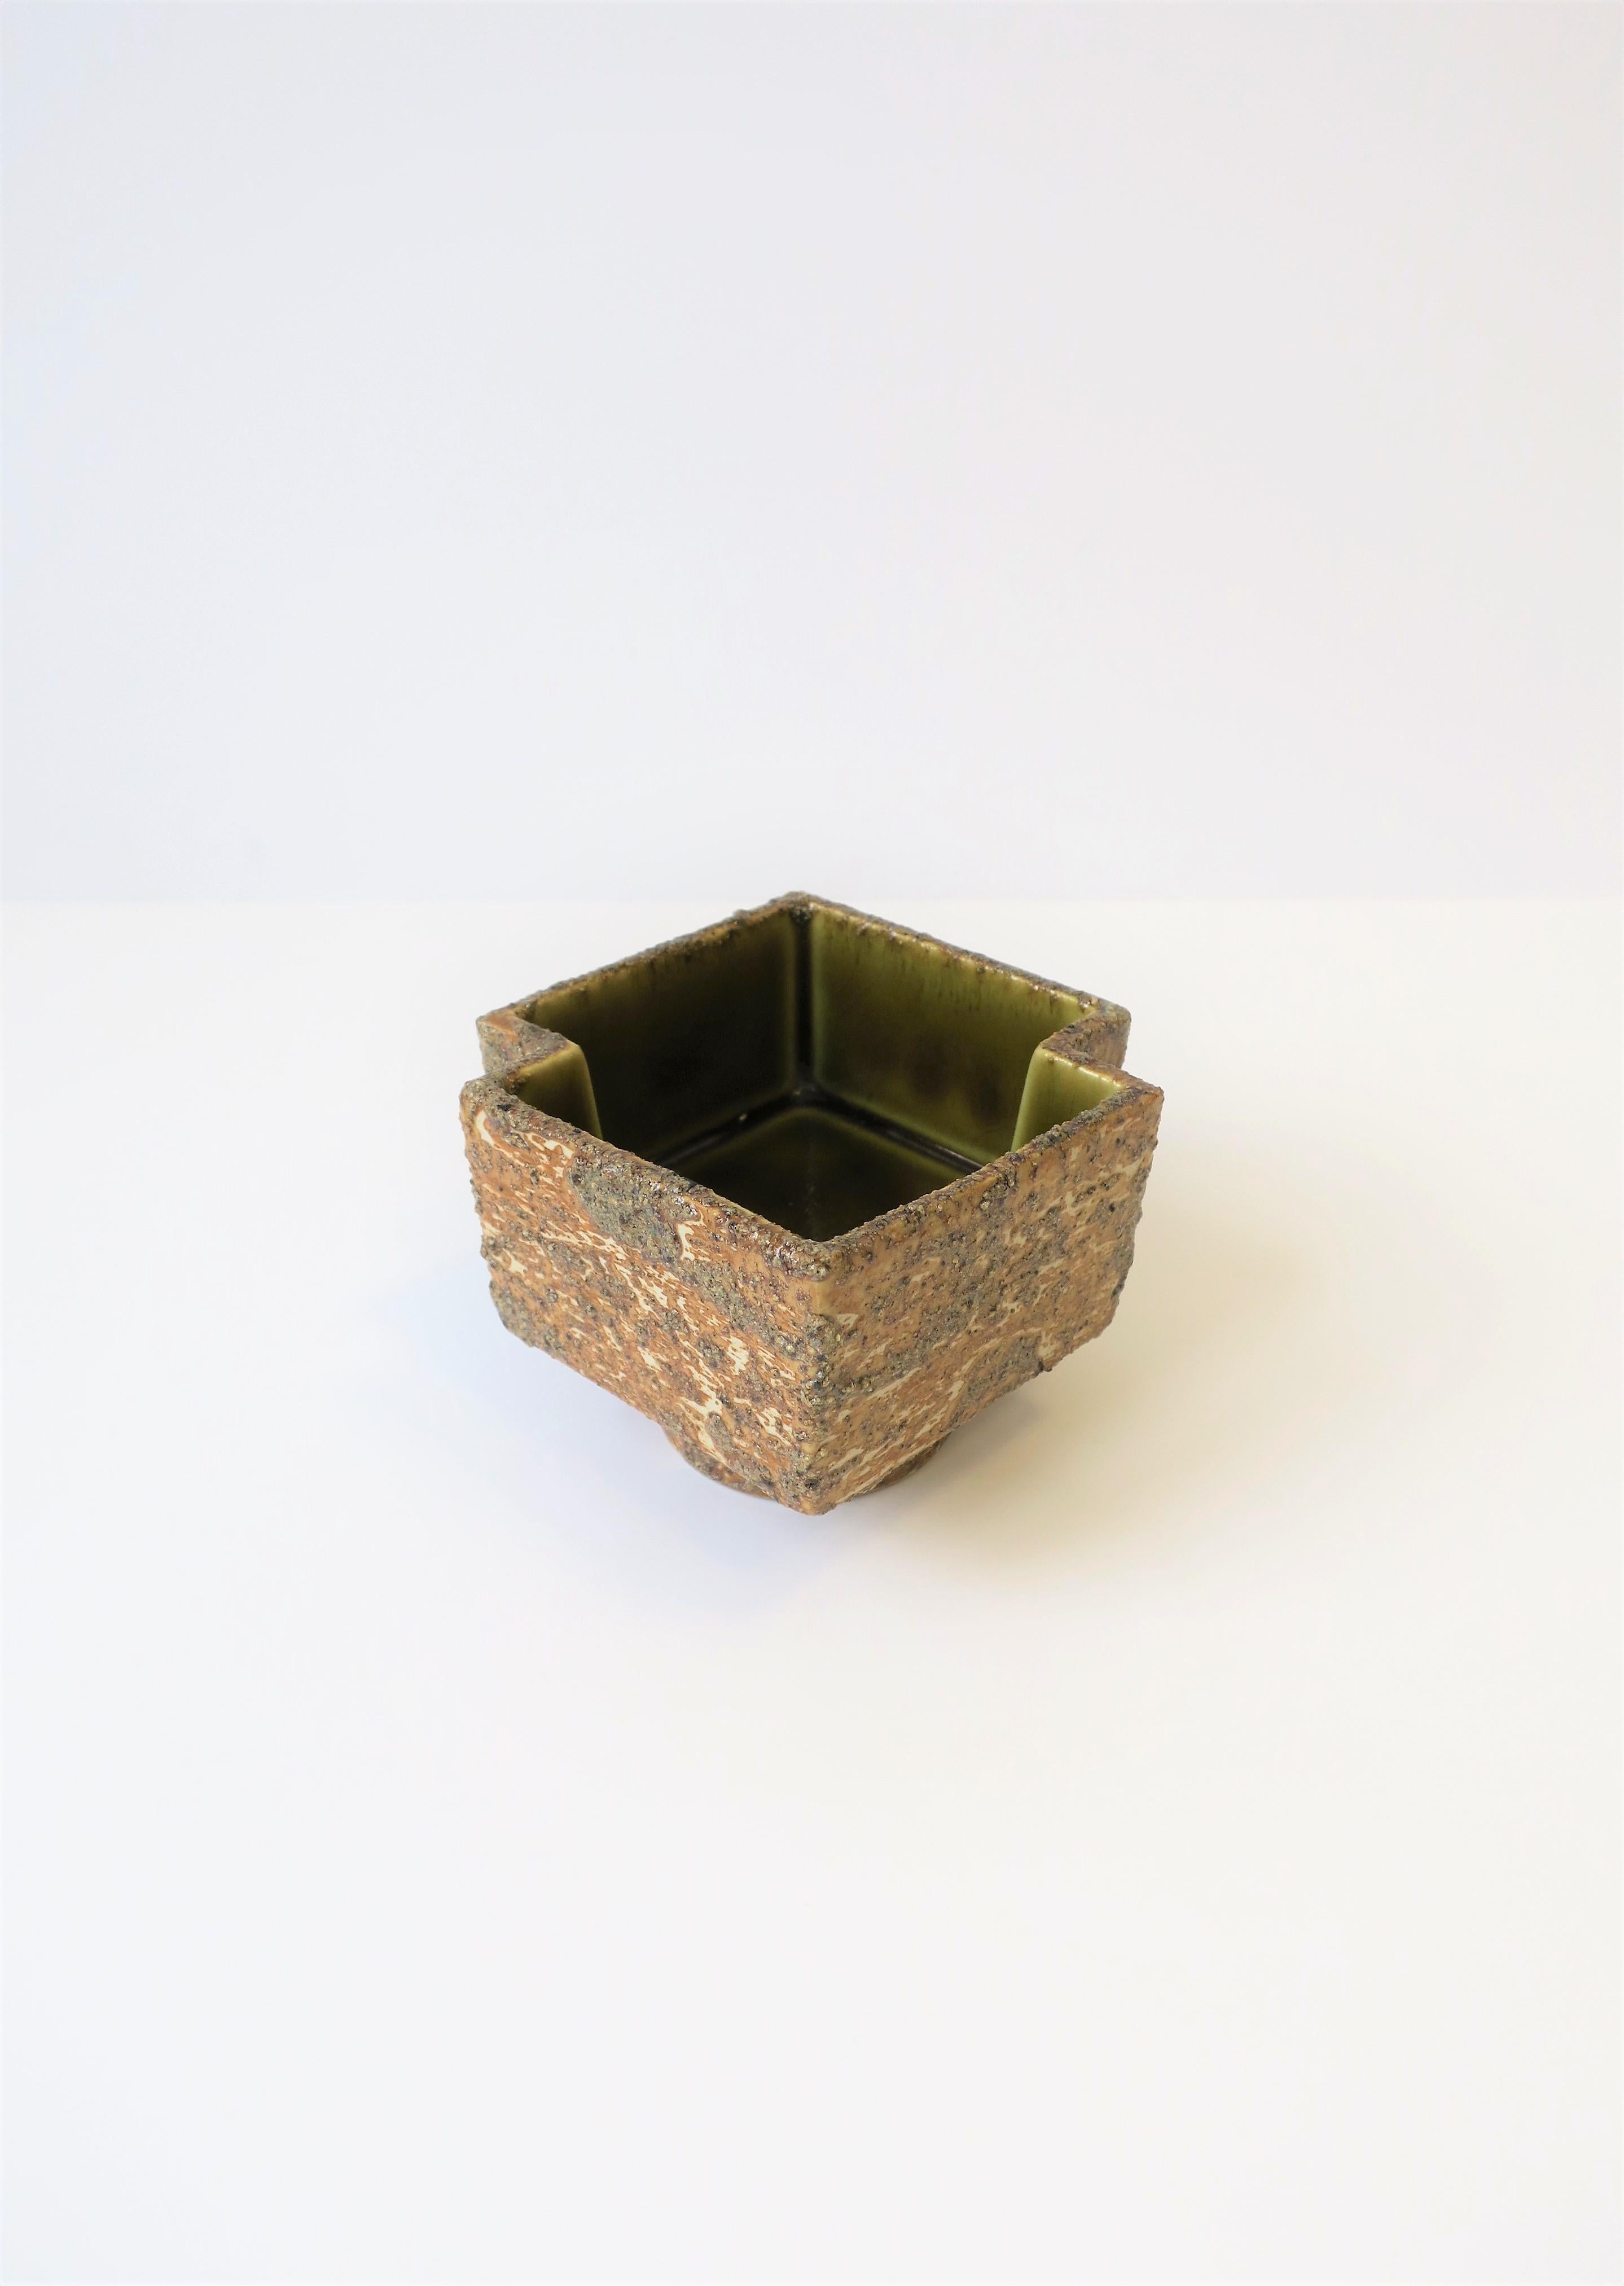 Textured Japanese Pottery Bowl 3